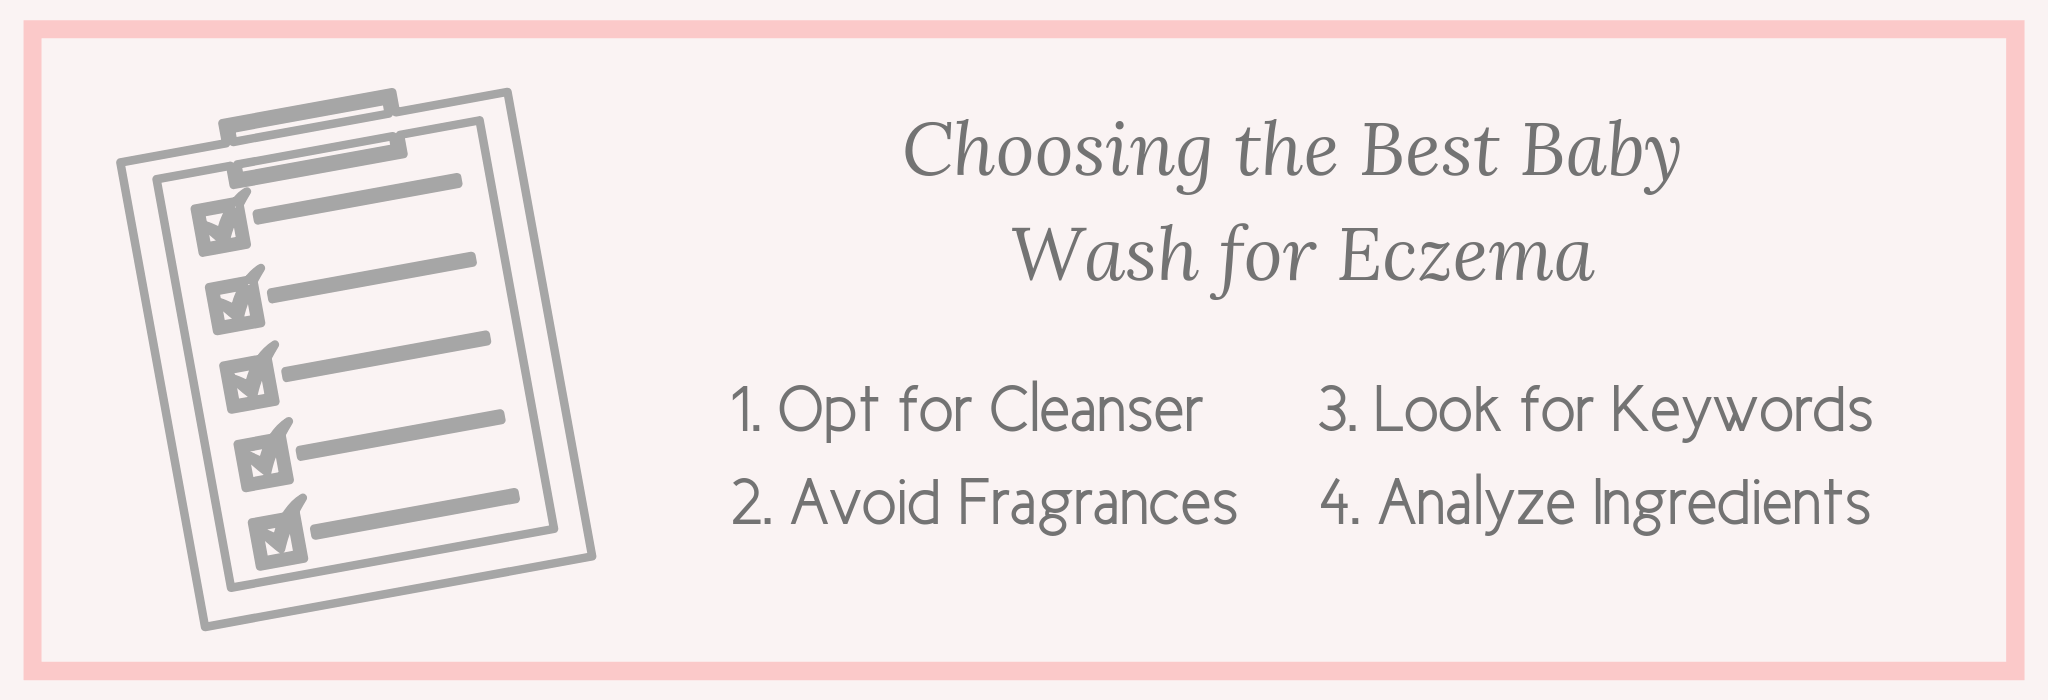 choosing-the-best-baby-wash-for-eczema